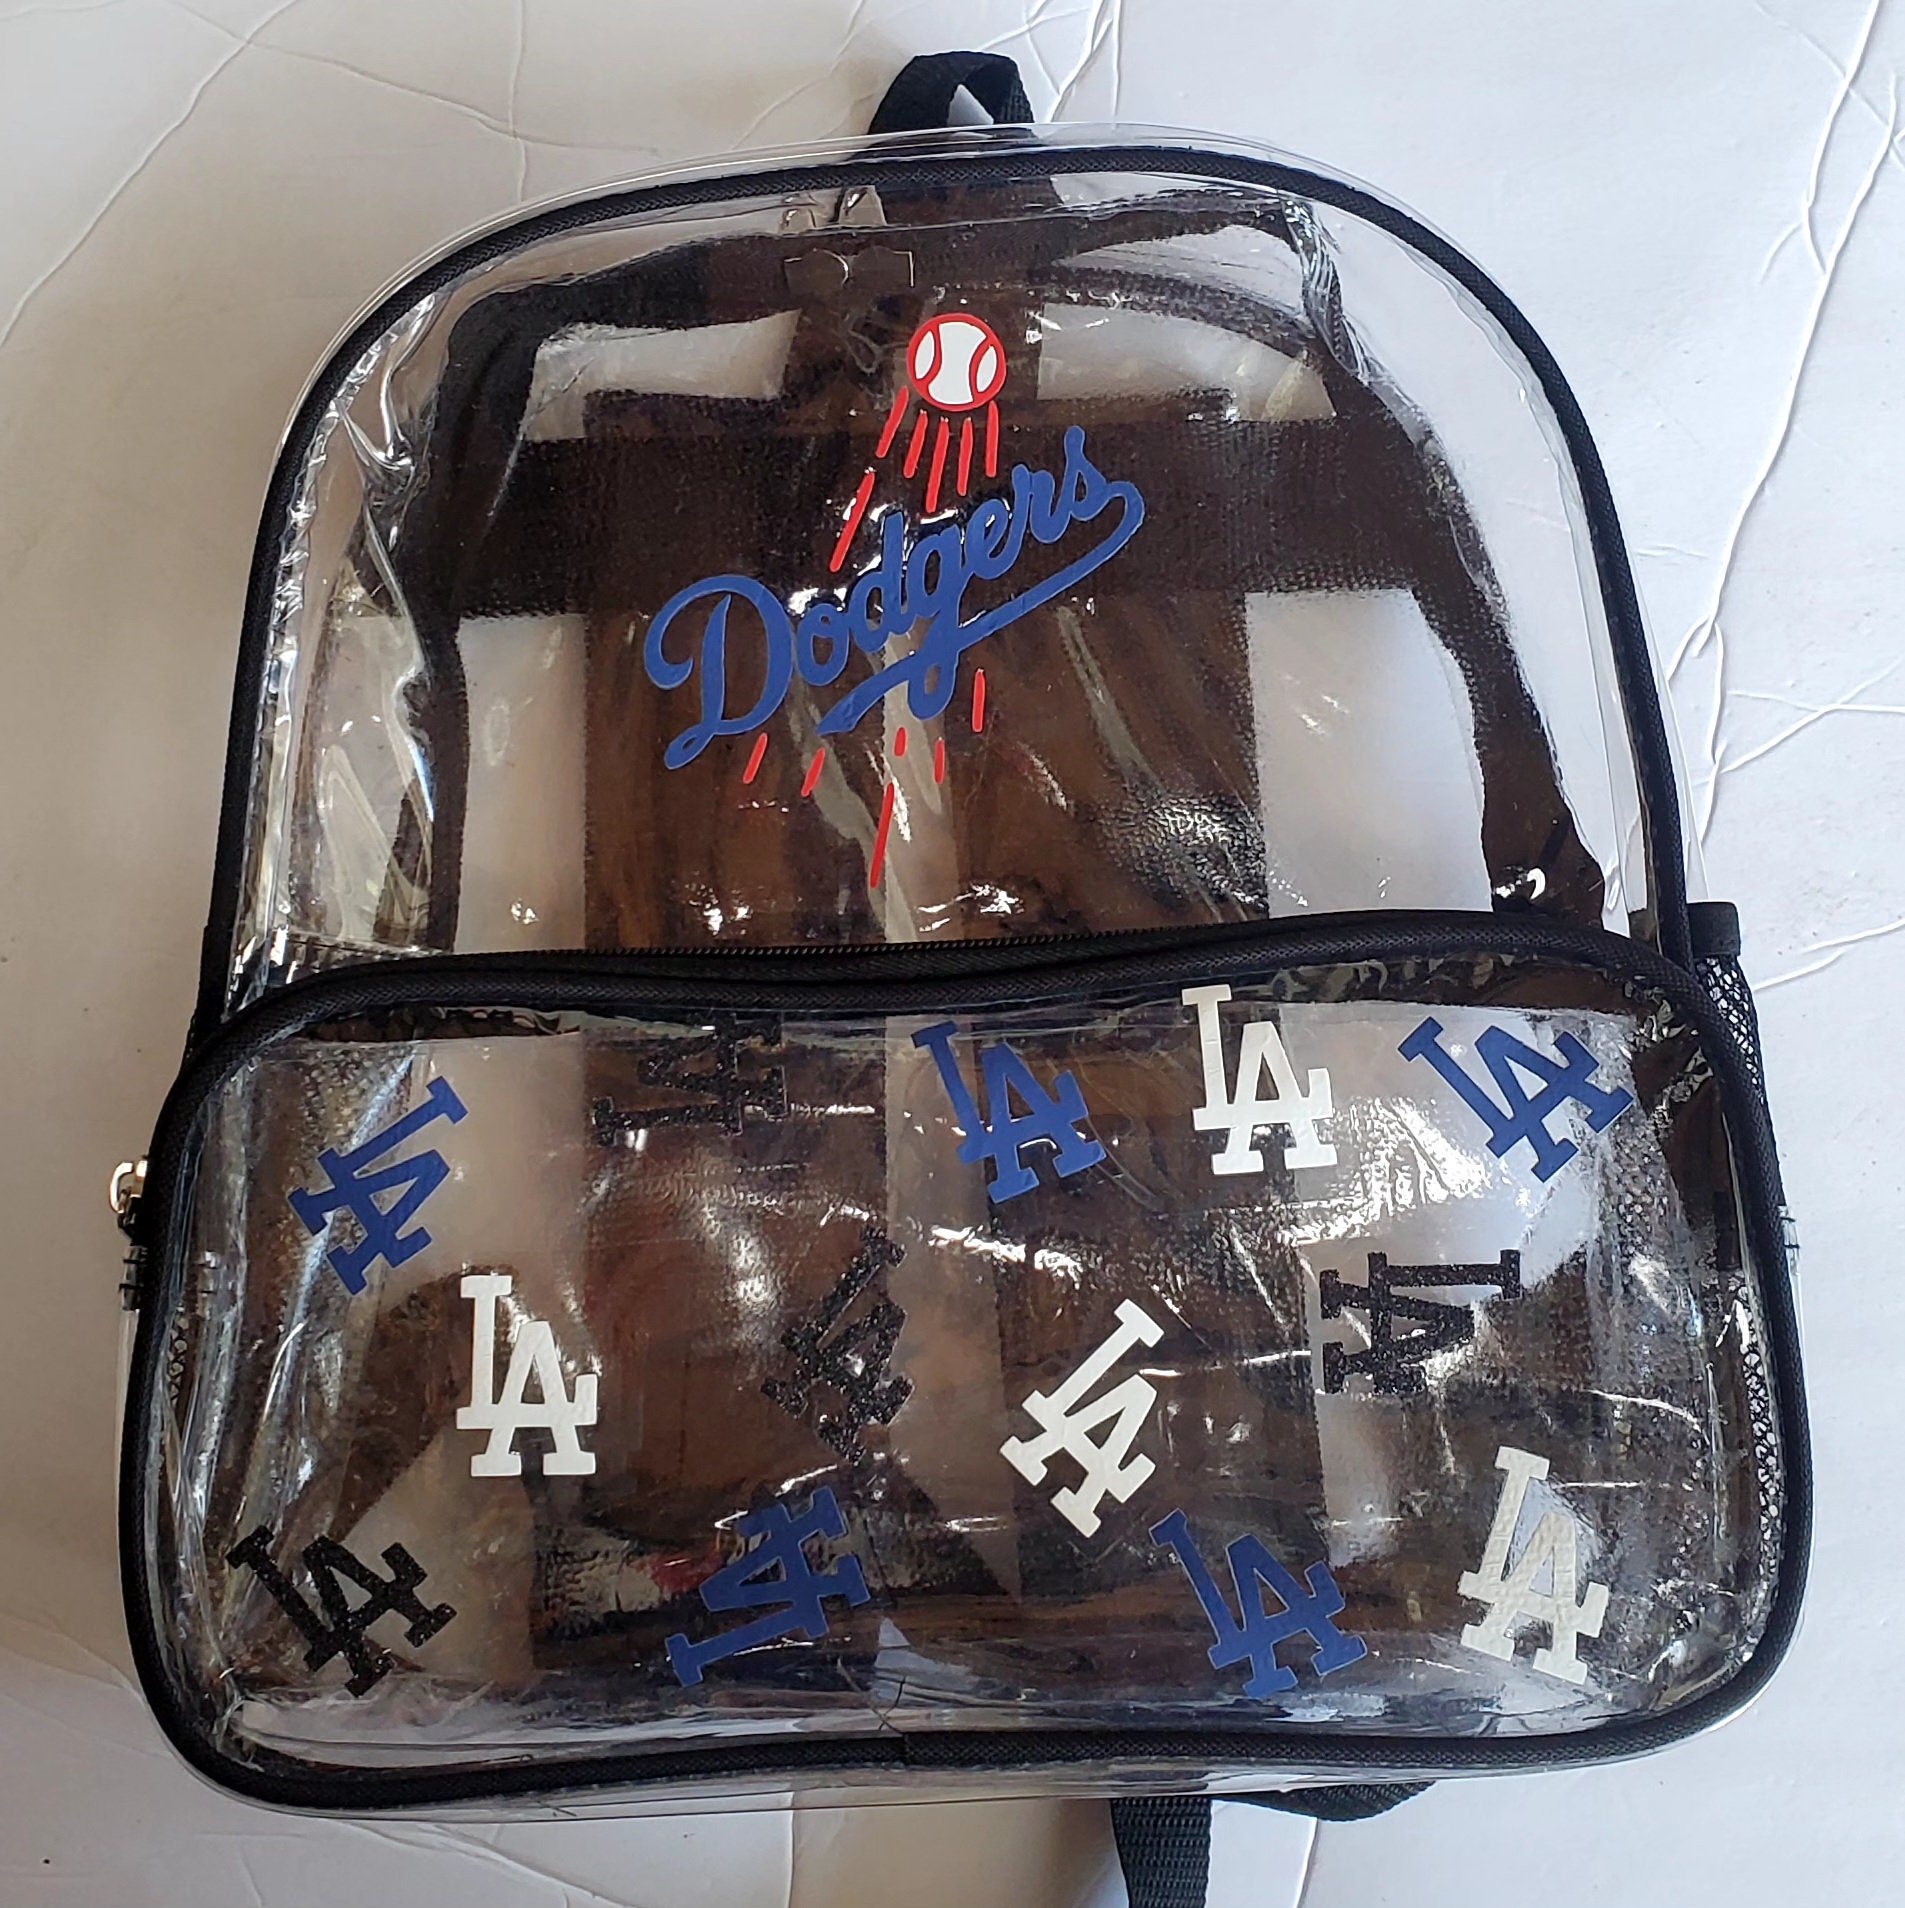 Dodgers Clear Bag Stadium Approved Clear Concert Purse with Black Straps